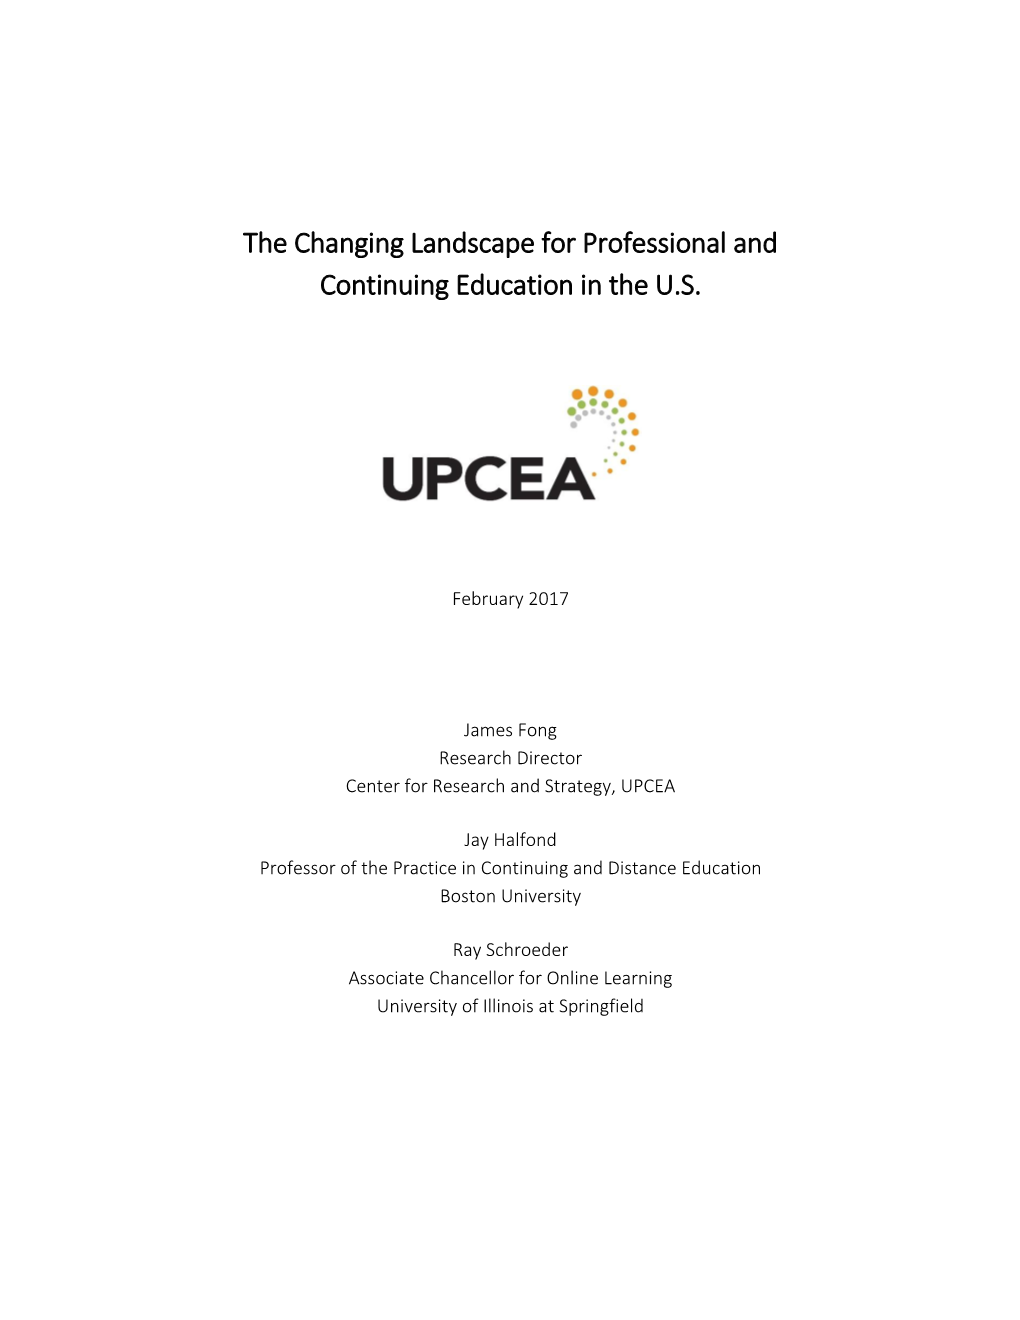 The Changing Landscape for Professional and Continuing Education in the U.S